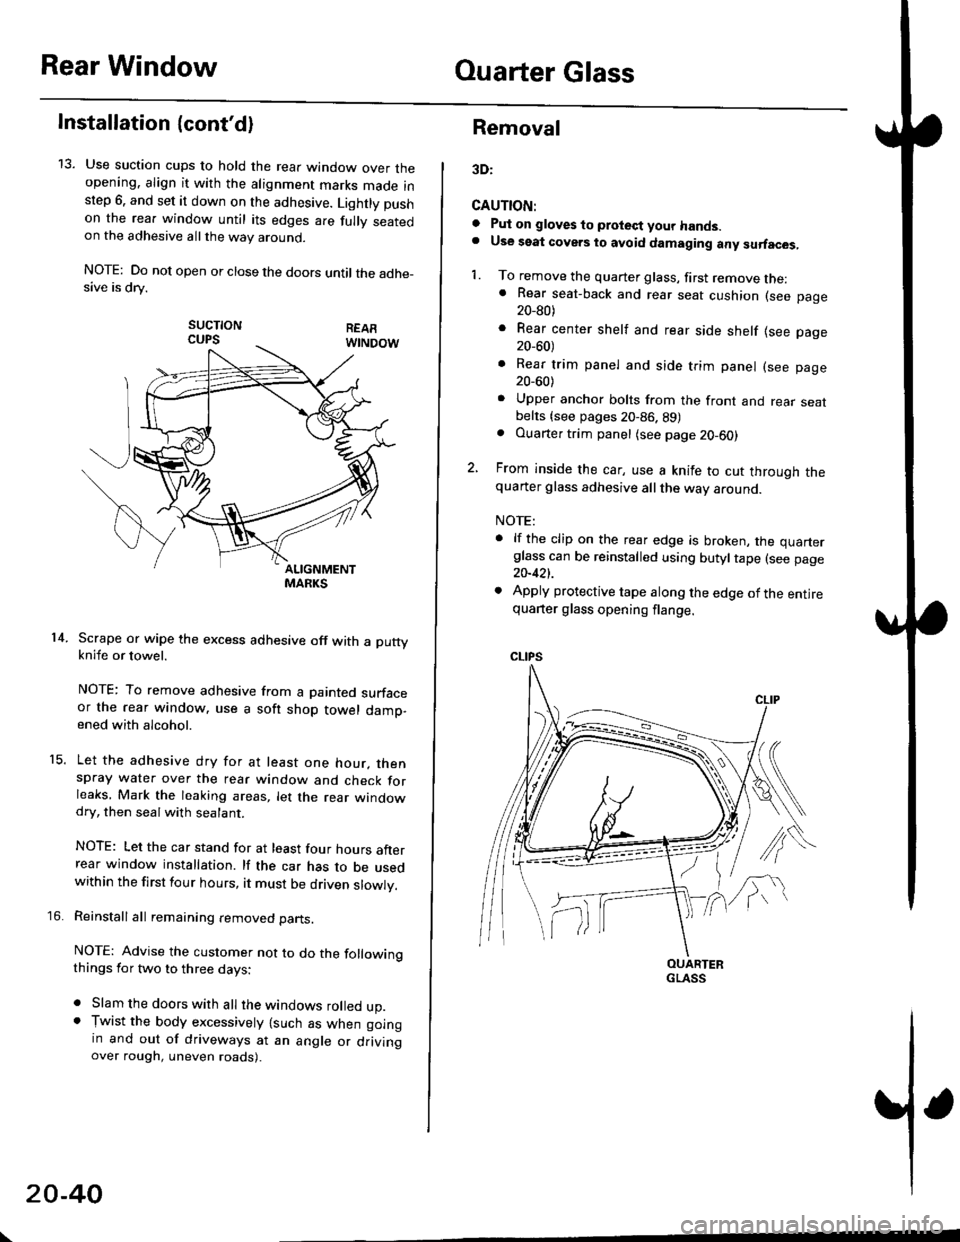 HONDA CIVIC 1996 6.G Workshop Manual Rear WindowOuarter Glass
Installation {contd)
13. Use suction cups to hold the rear window over theopening. align it with the alignment marks made inslep 6. and set it down on the adhesive. Lightly p